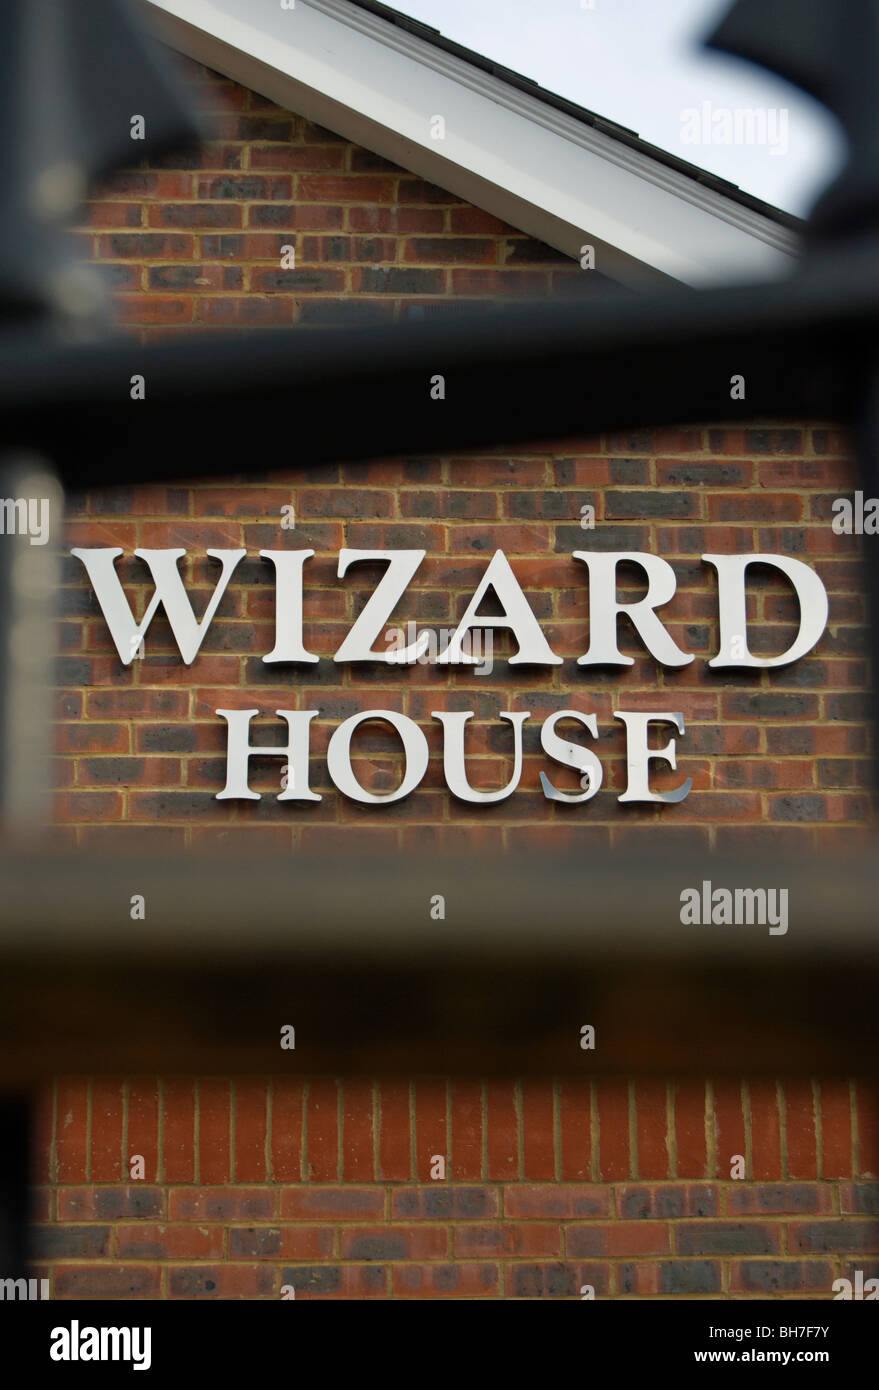 wizard house, head office of wizard toys, a company manufacturing arts and crafts products aimed at children Stock Photo